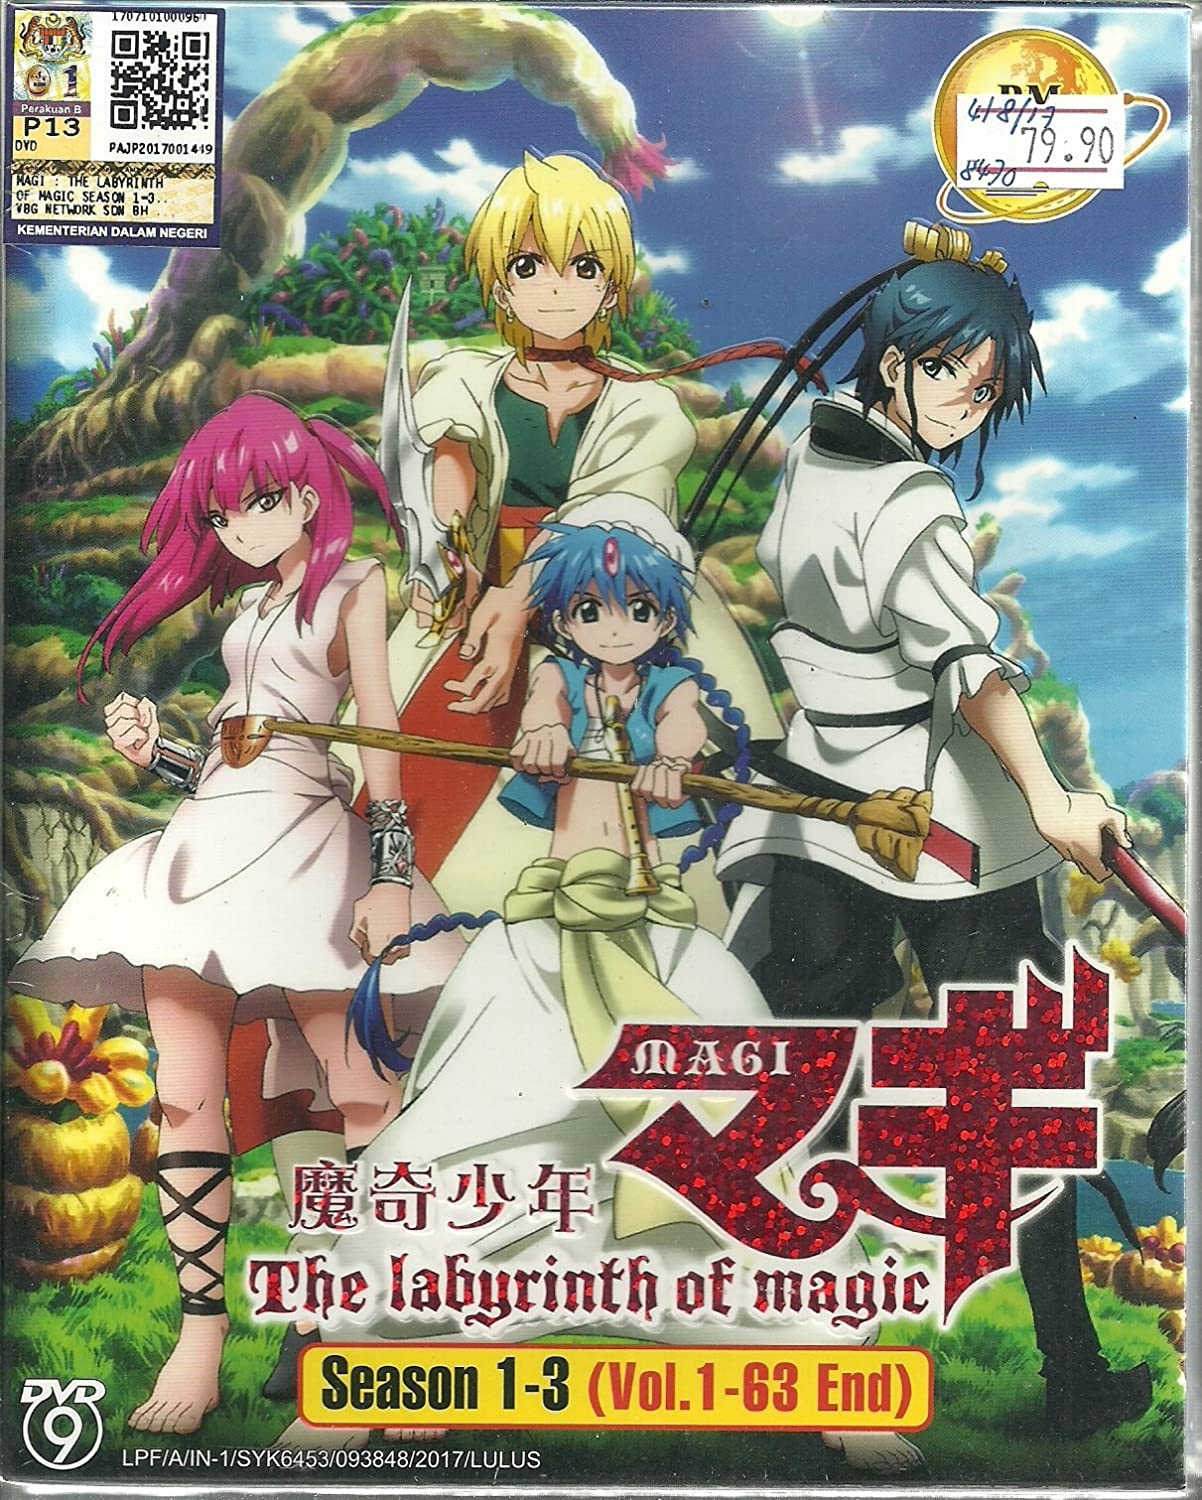 How to Watch Magi Series? Easiest Watch Order Guide